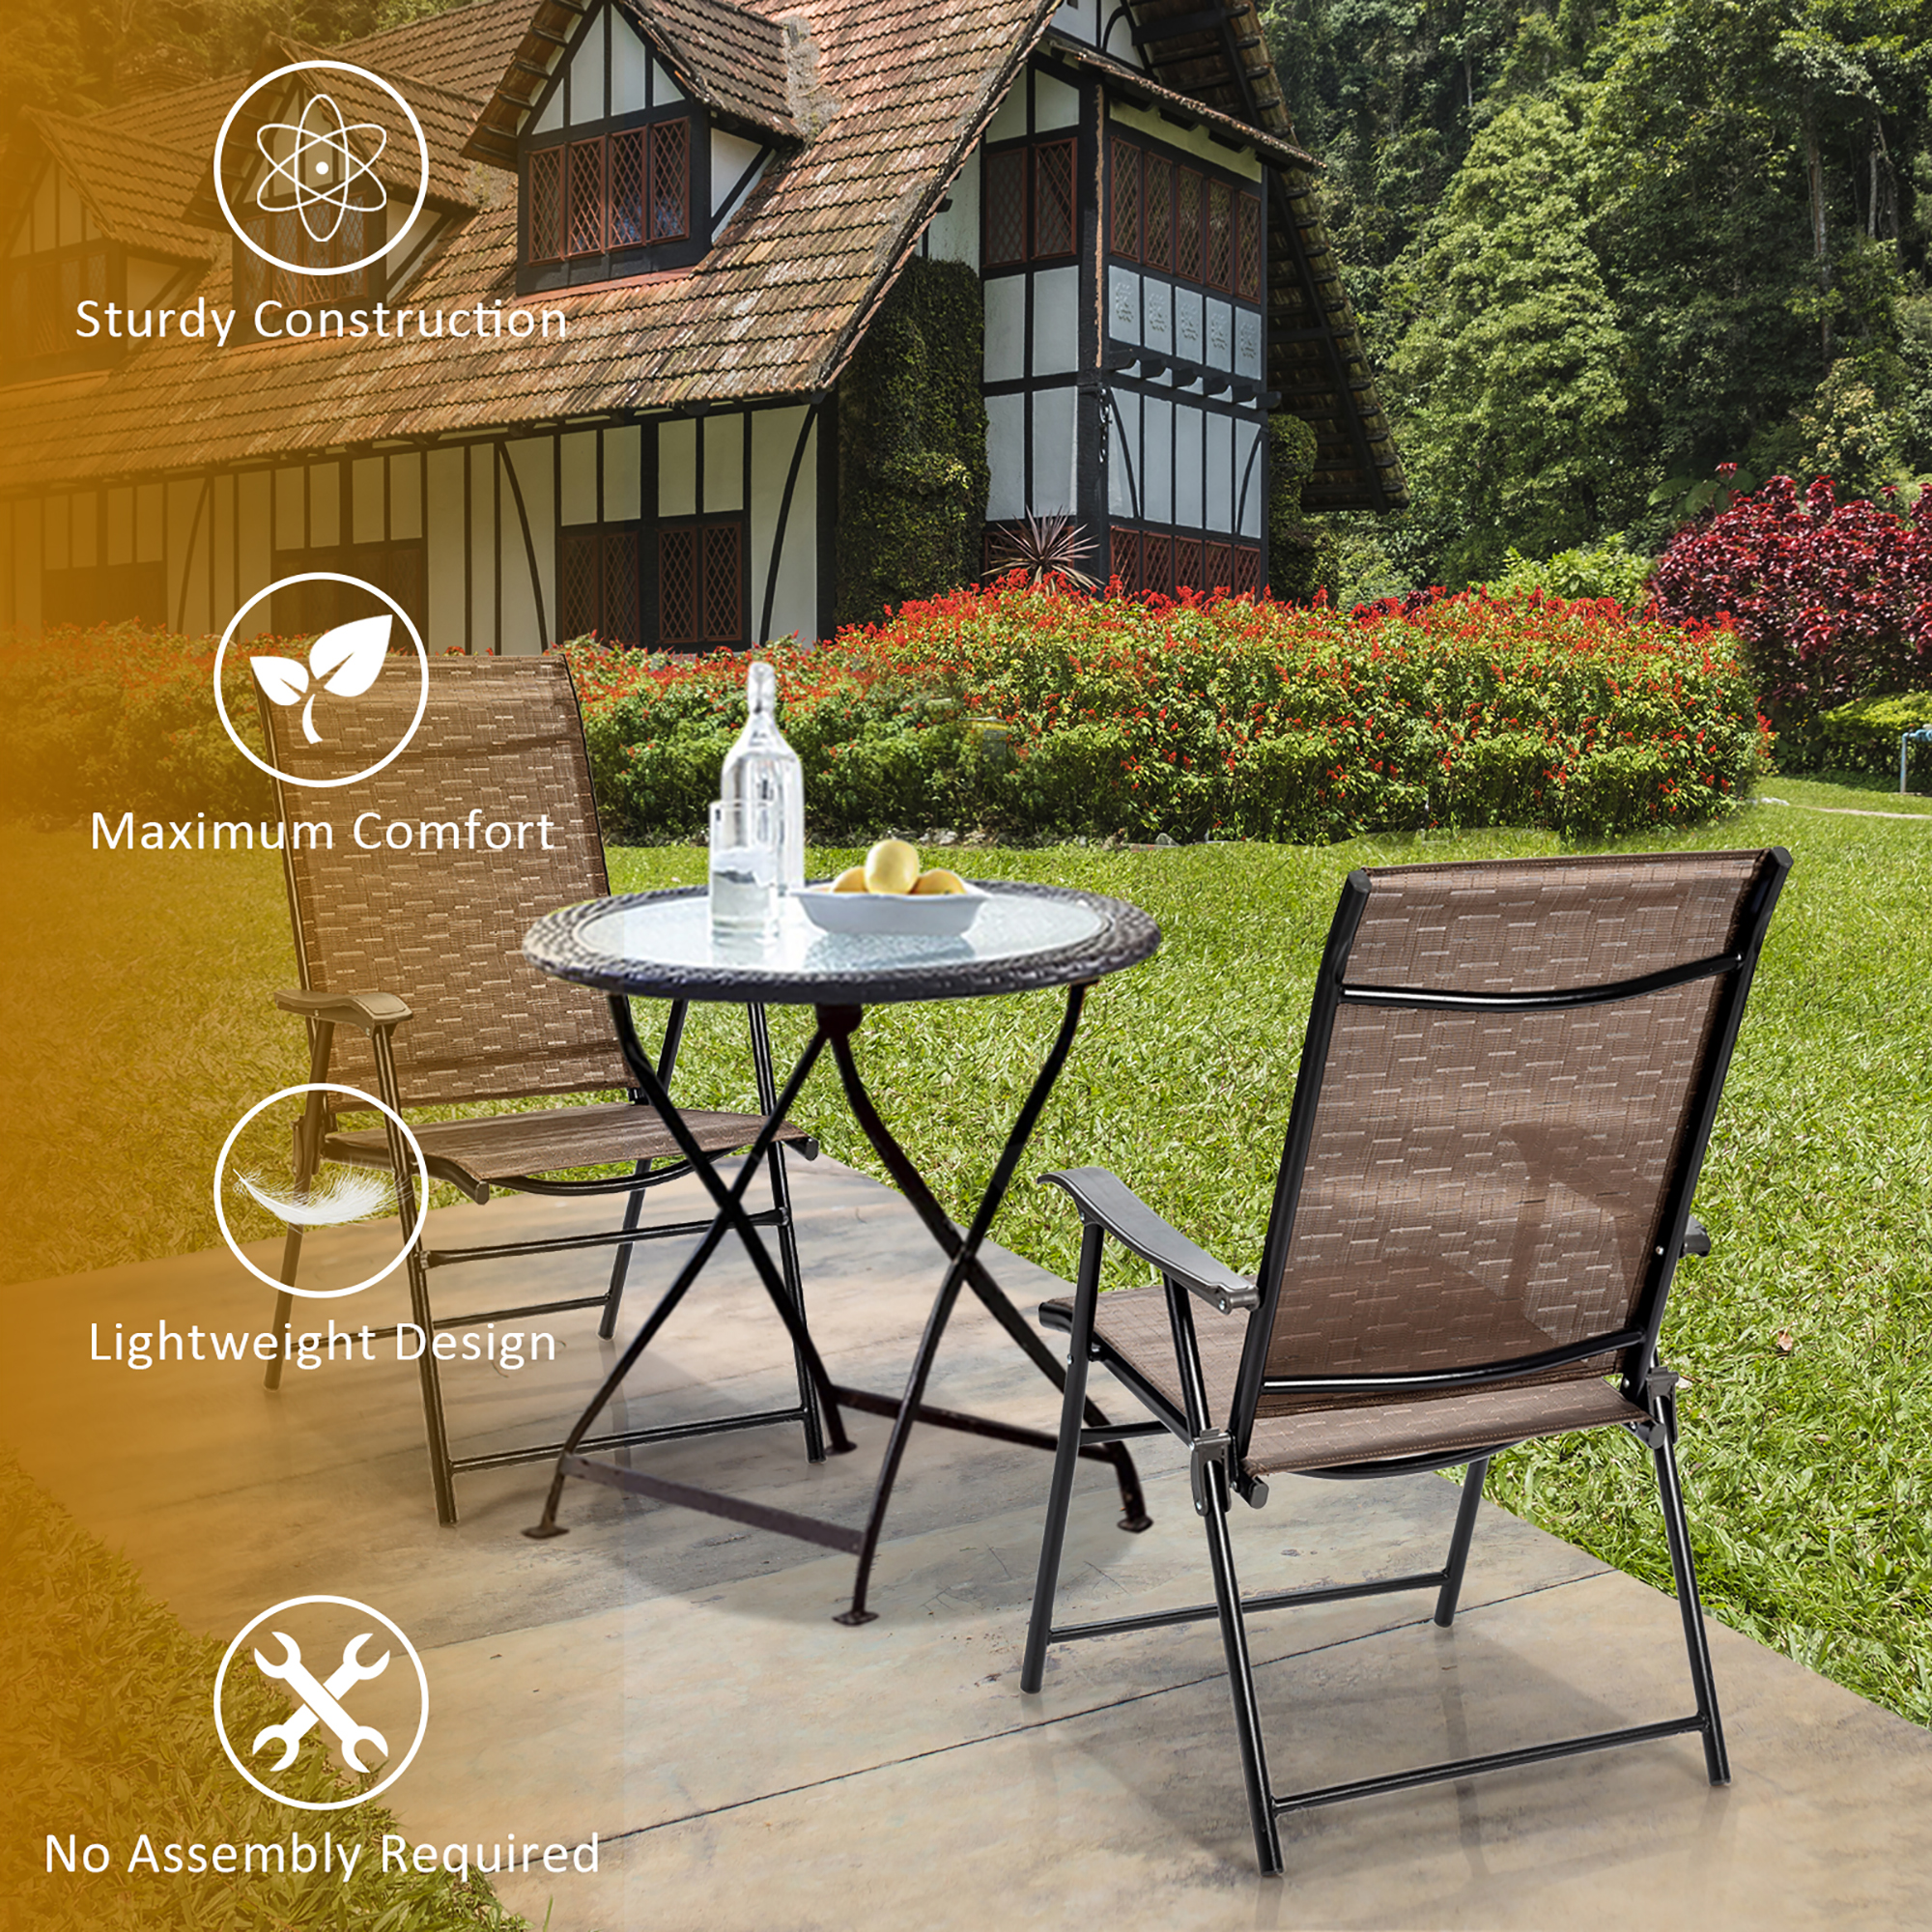 Costway 4PCS Outdoor Patio Folding Chair Camping Portable Lawn Garden W/Armrest